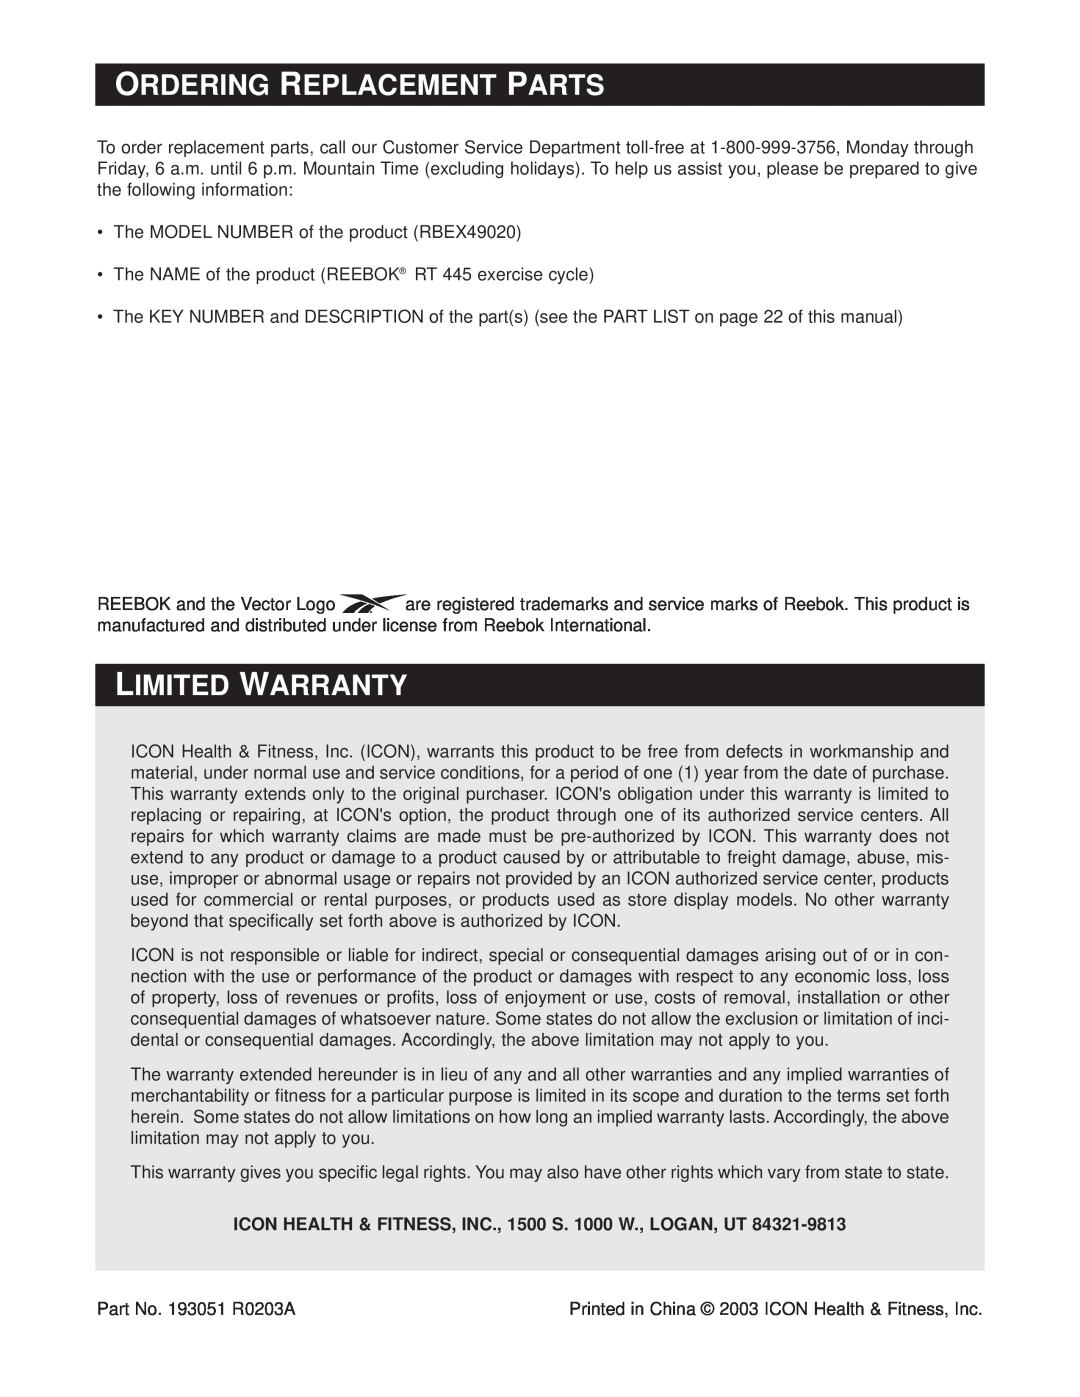 Reebok Fitness RBEX49020 manual Ordering Replacement Parts, Limited Warranty 